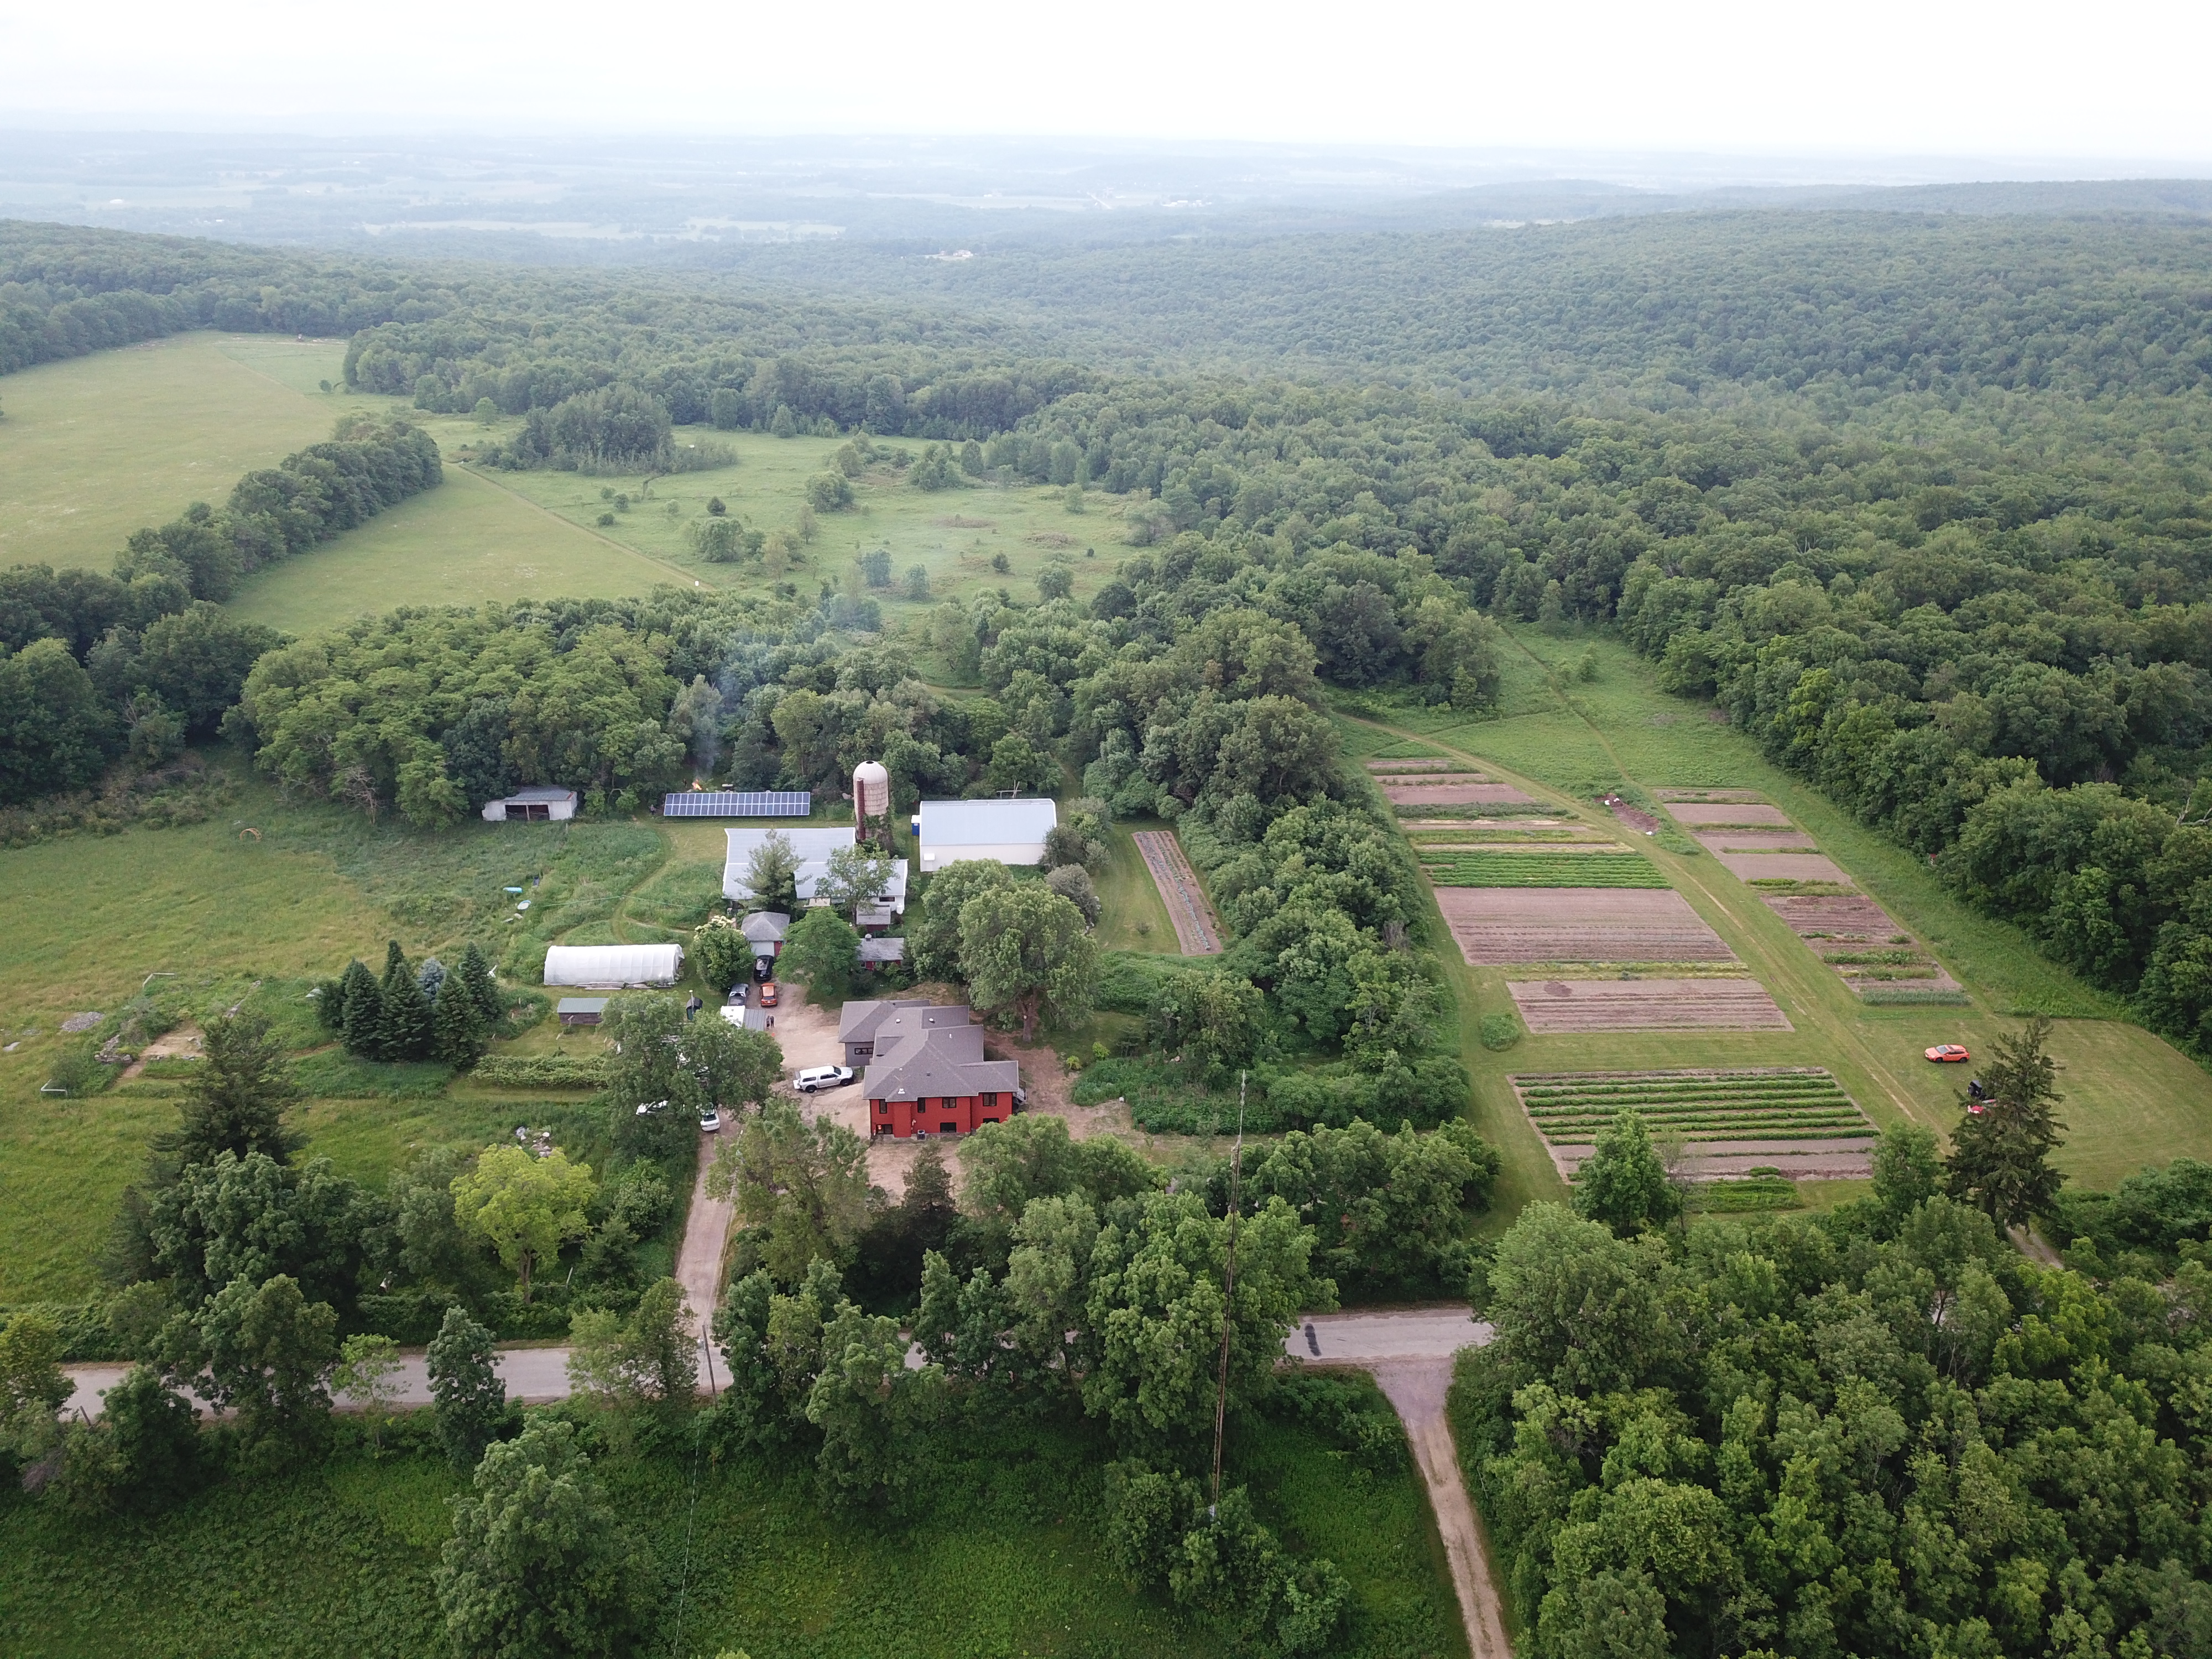 Aerial photo of the Four Elements herb farm